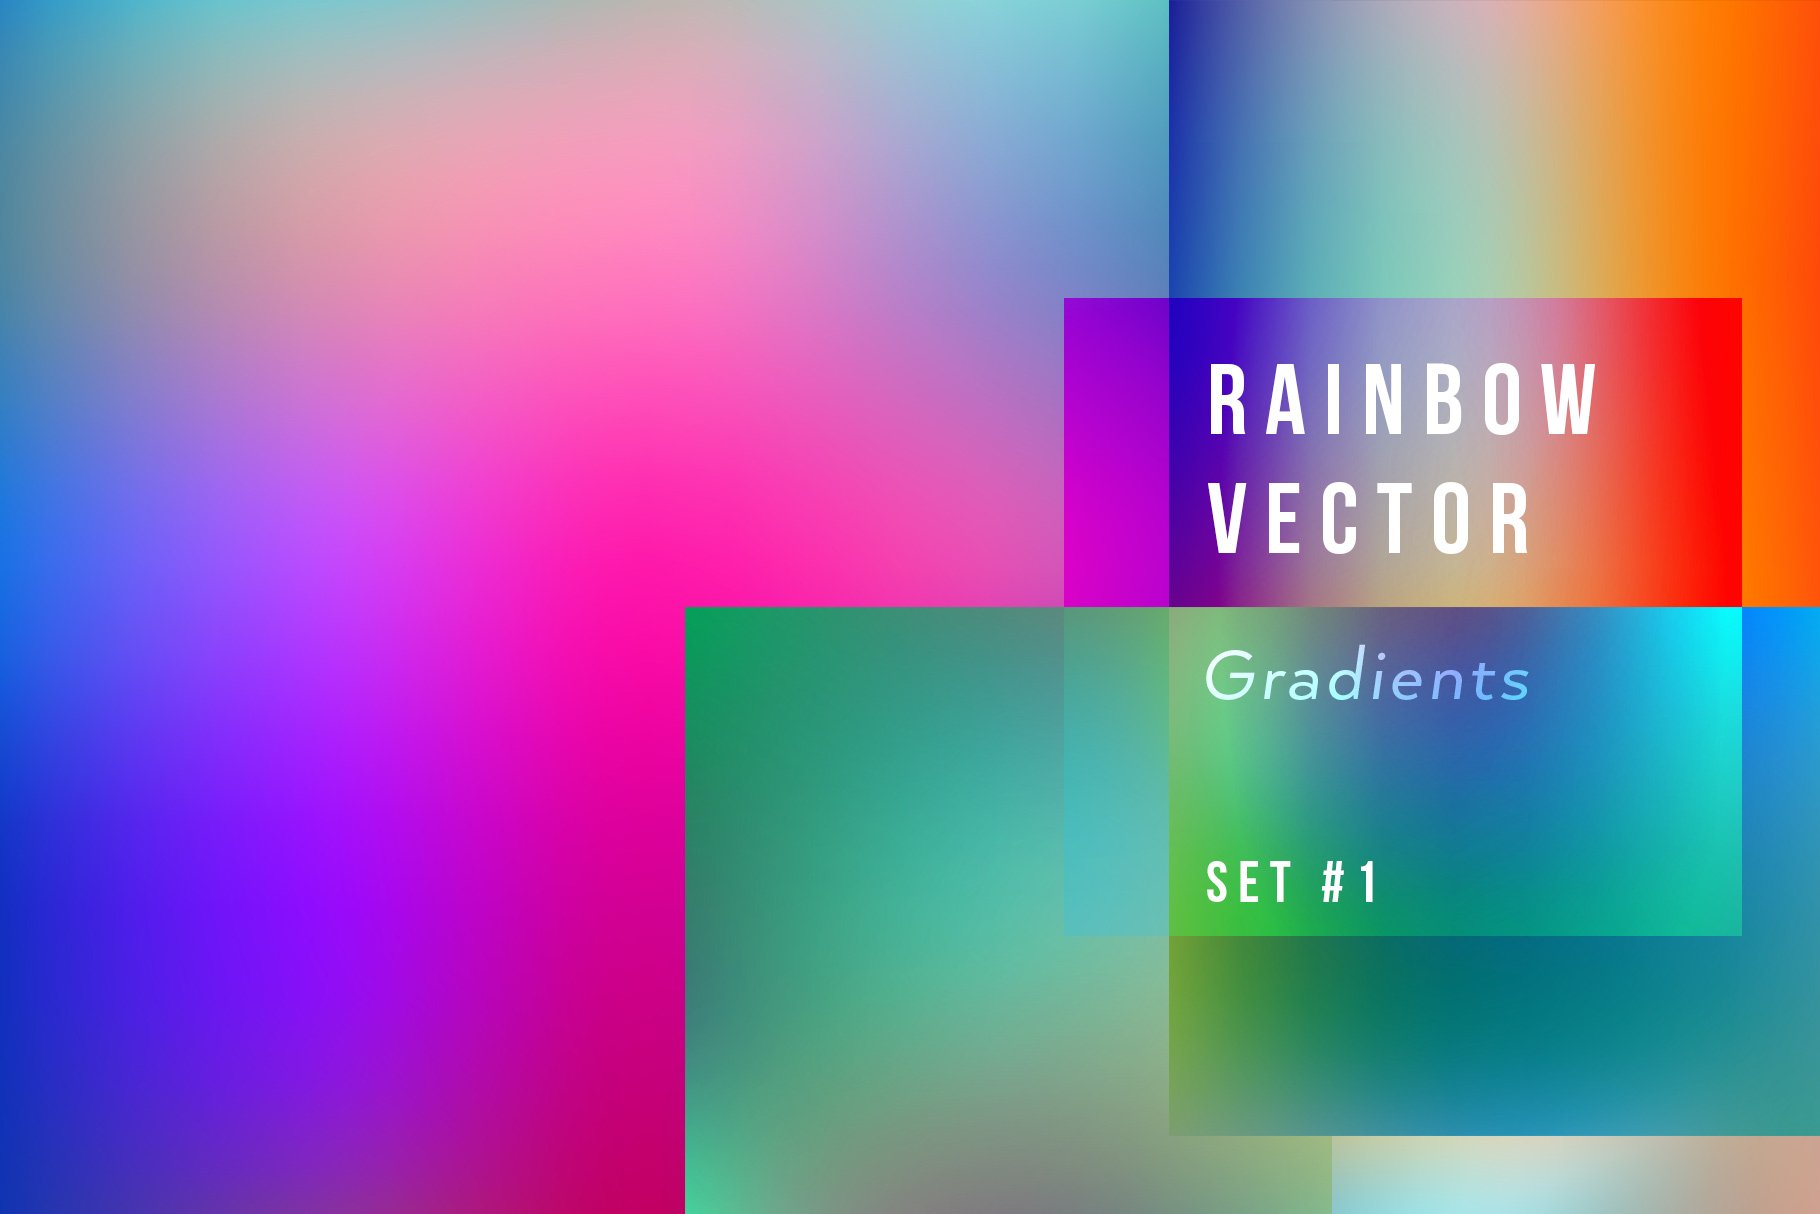 Rainbow Colorful Gradient Set Vector cover image.